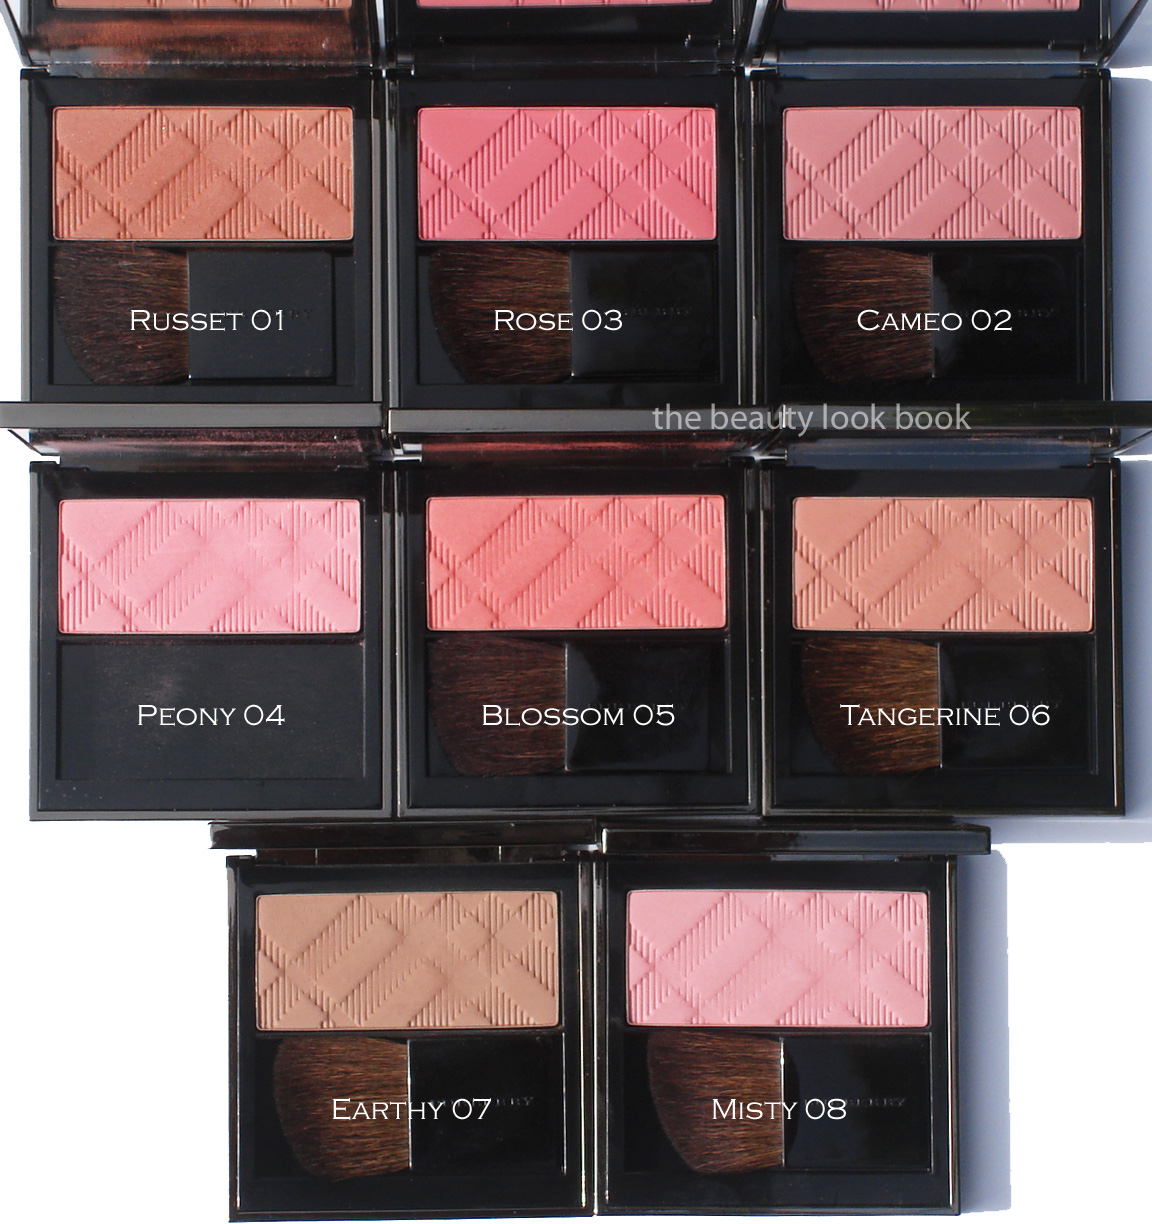 Burberry beauty blushes